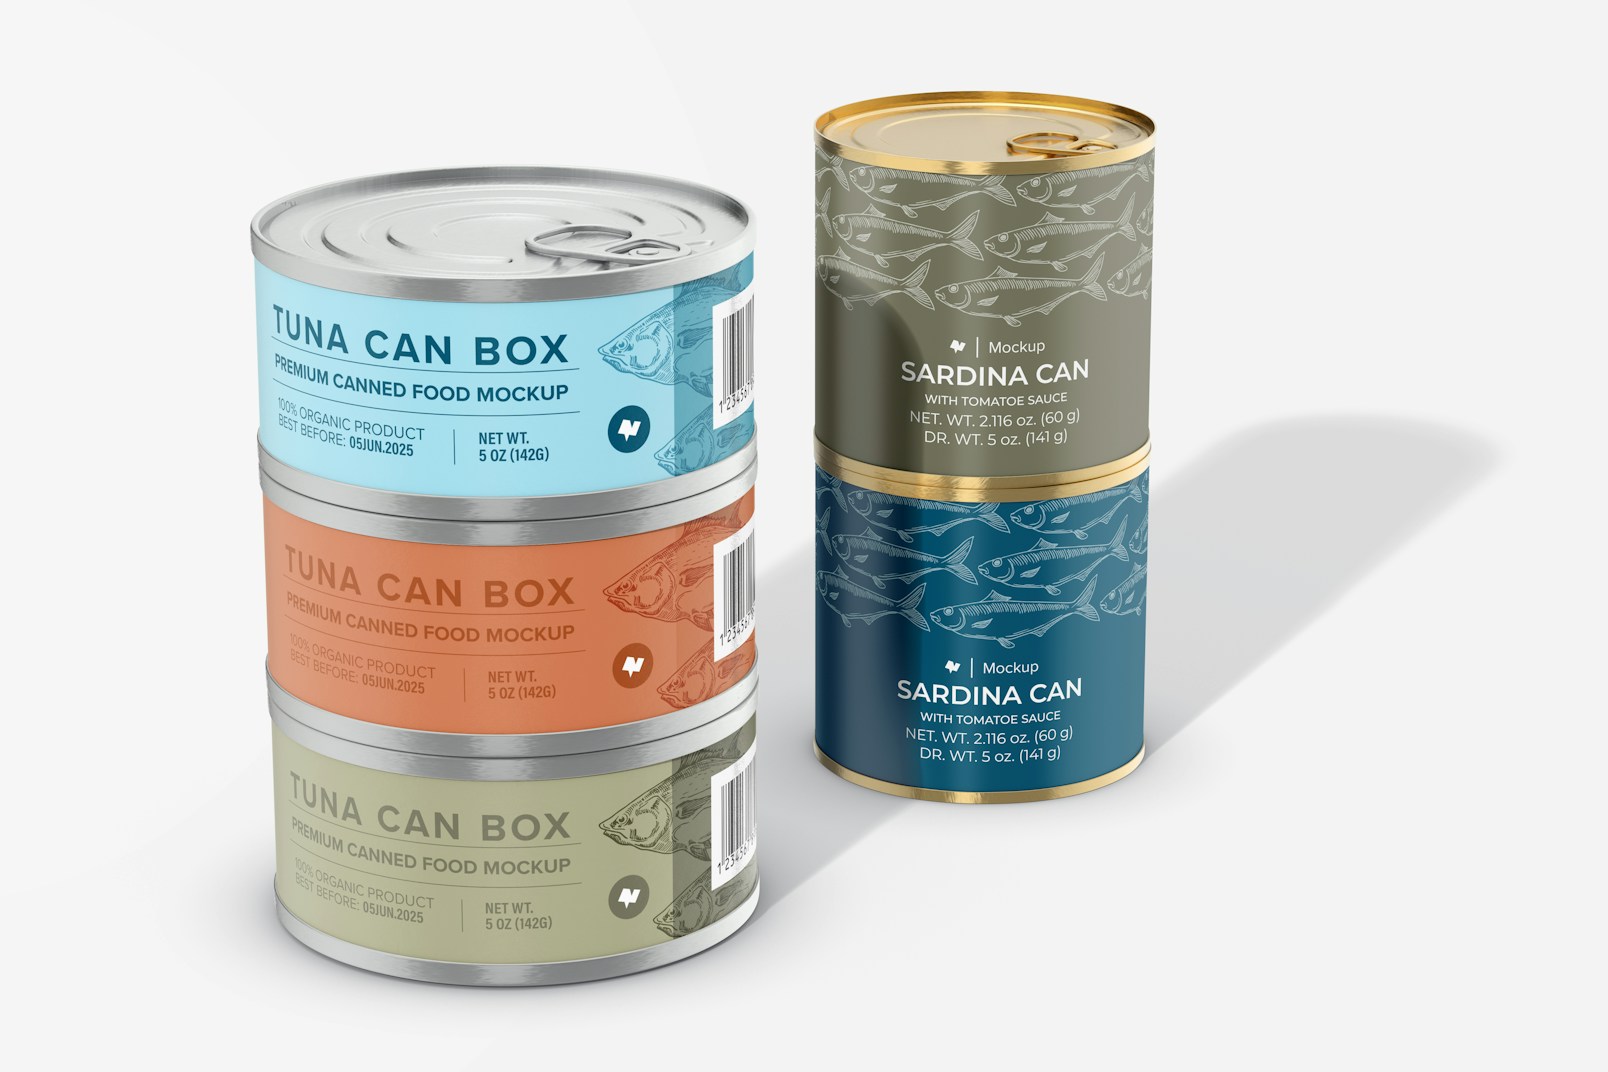 Premium Canned Food Mockup, Stacked